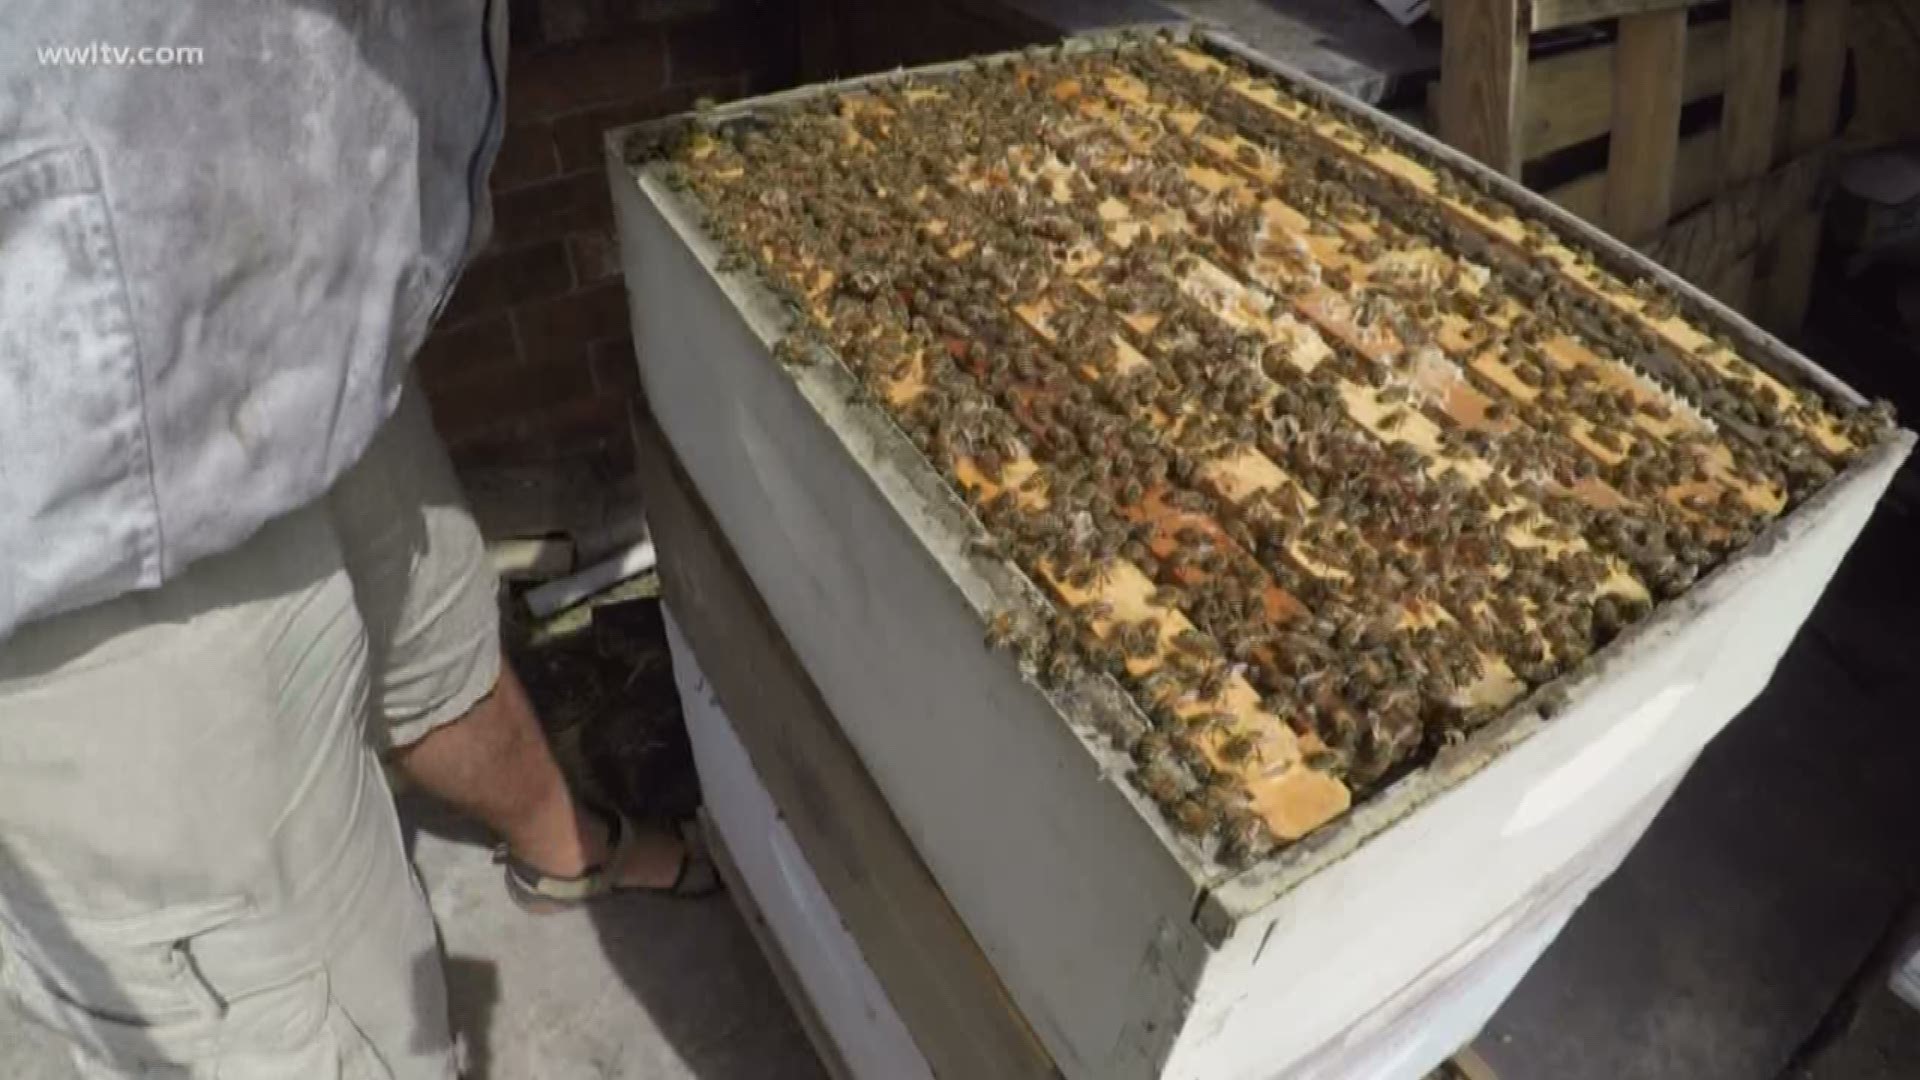 Chef Kevin Belton caught up with local beekeeper, David Young, to see how he turned his home into something sweeter than produce.
